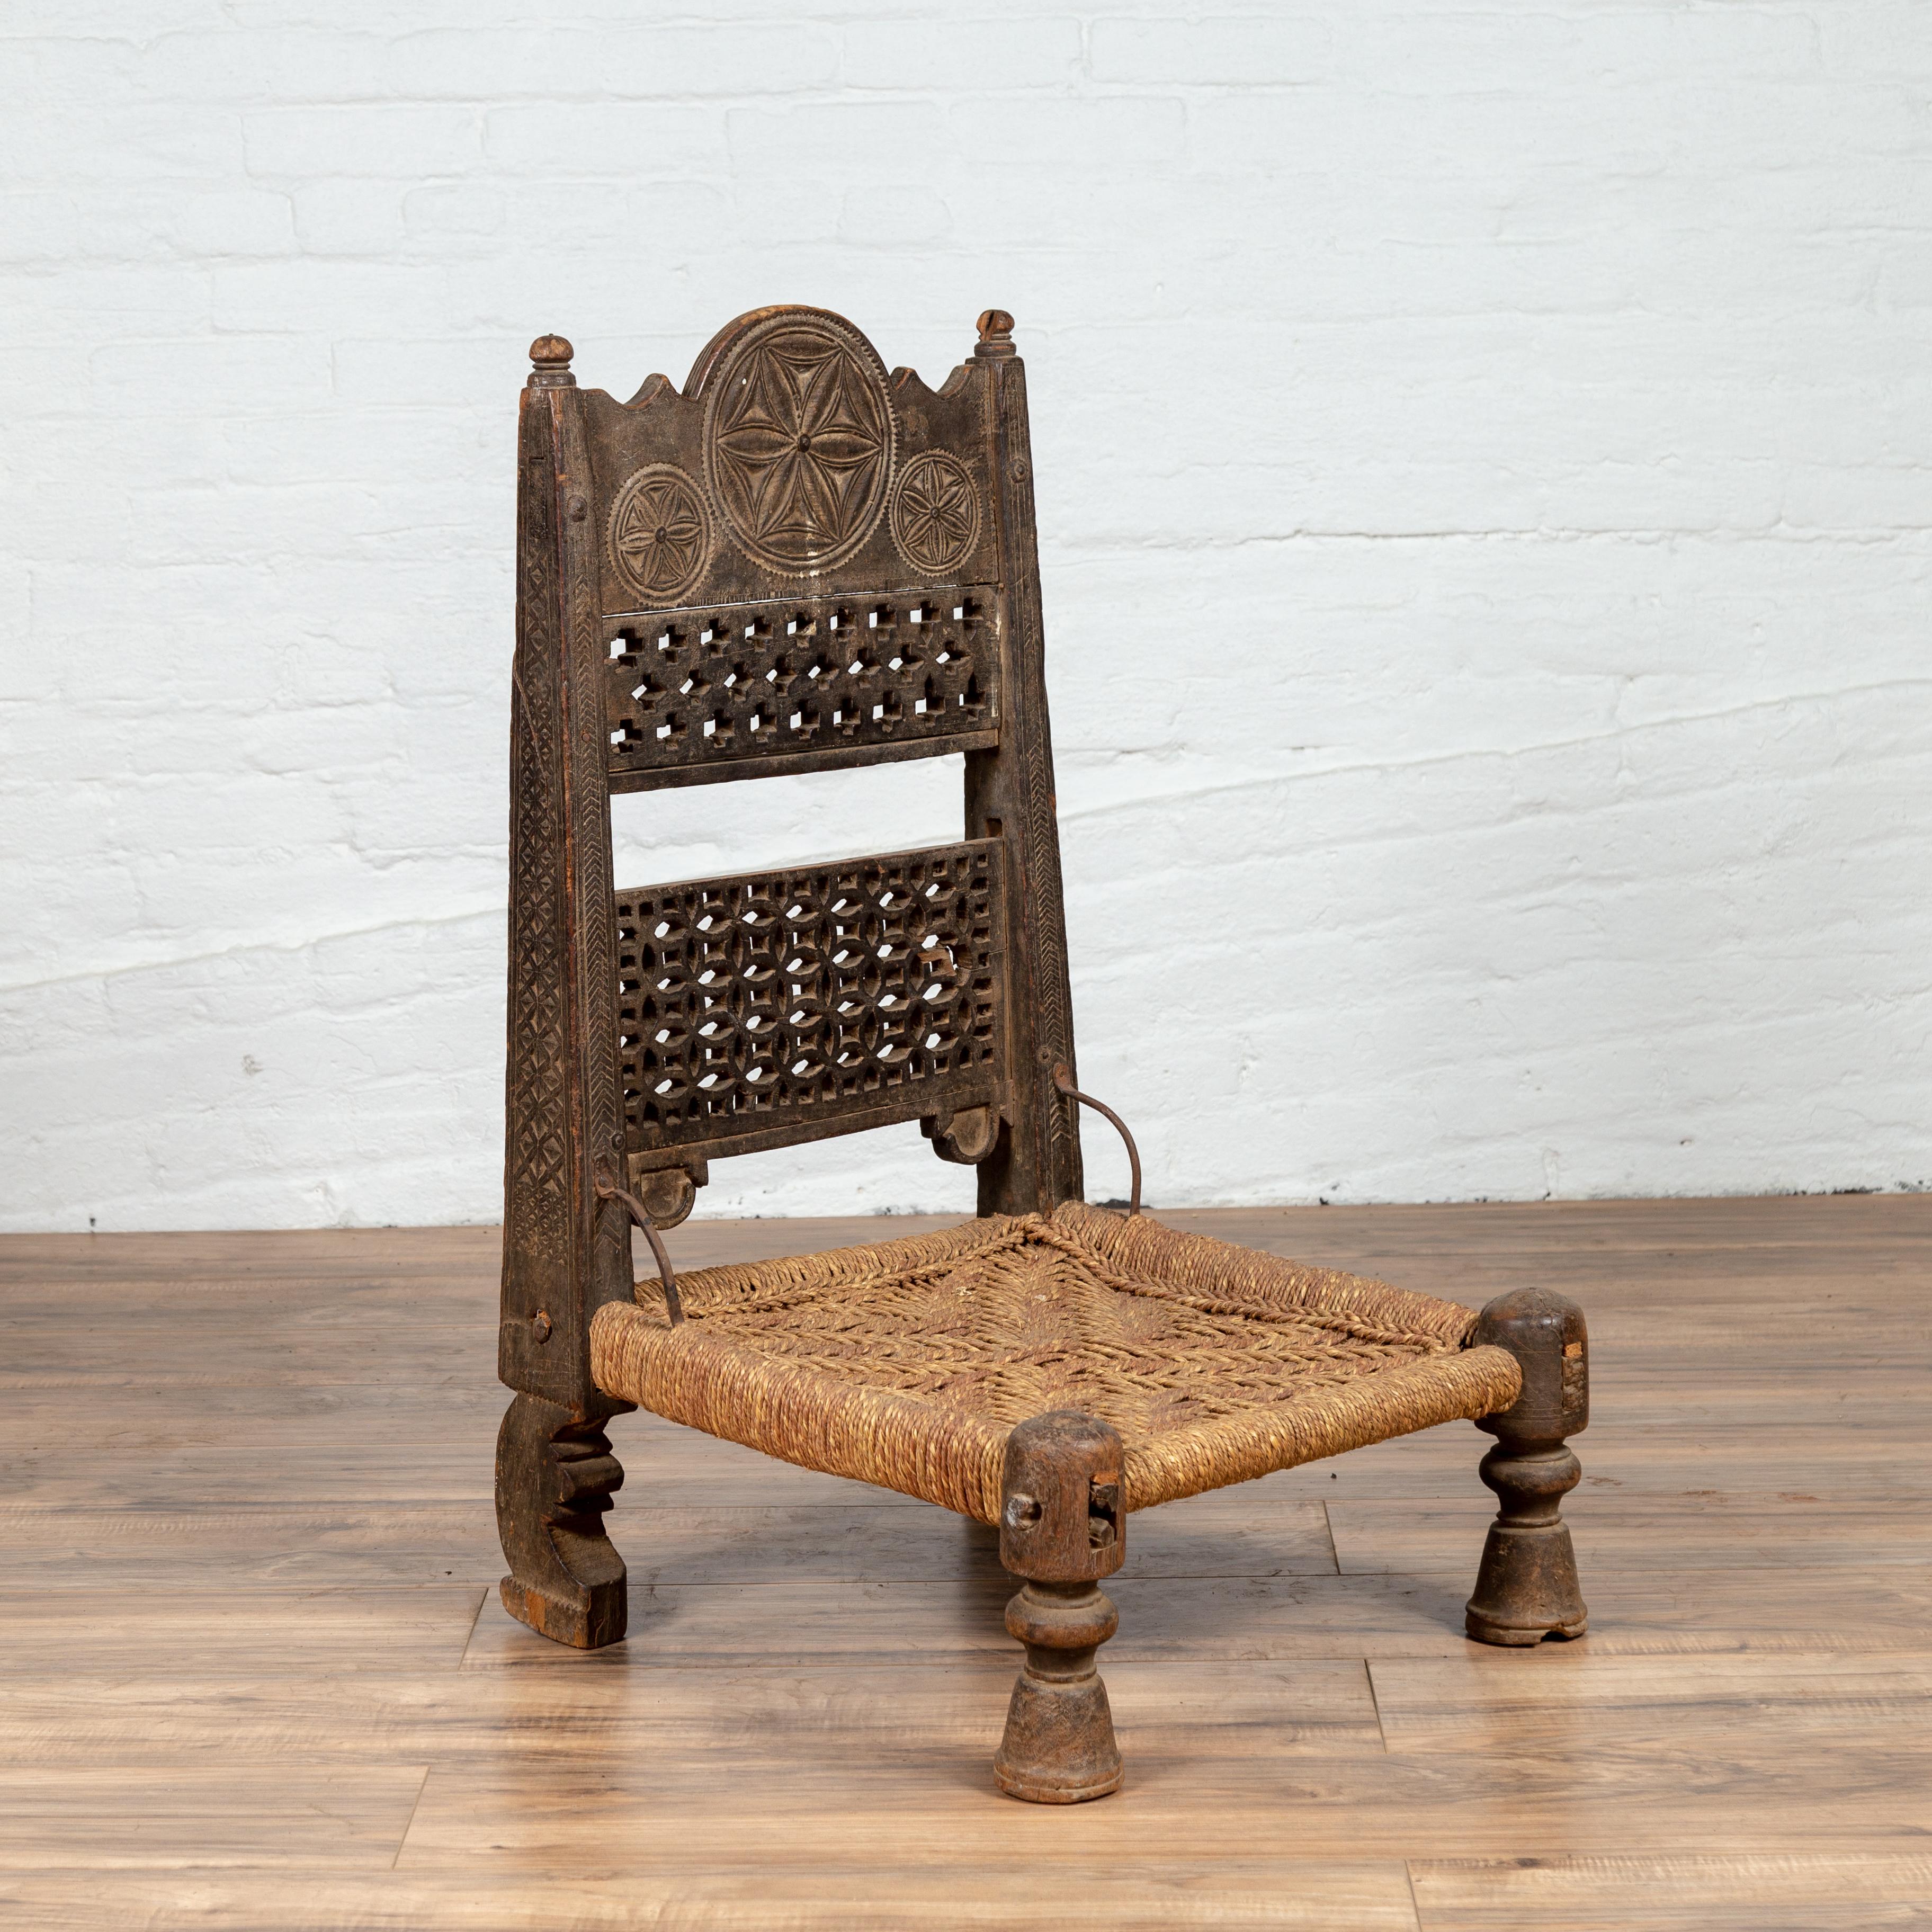 An antique Indian rustic low wooden chair from the 19th century, with fretwork accents, carved rosette and handwoven twine. Charming our eyes with its rustic appearance, this low wooden chair features a straight back, adorned with rosettes hand